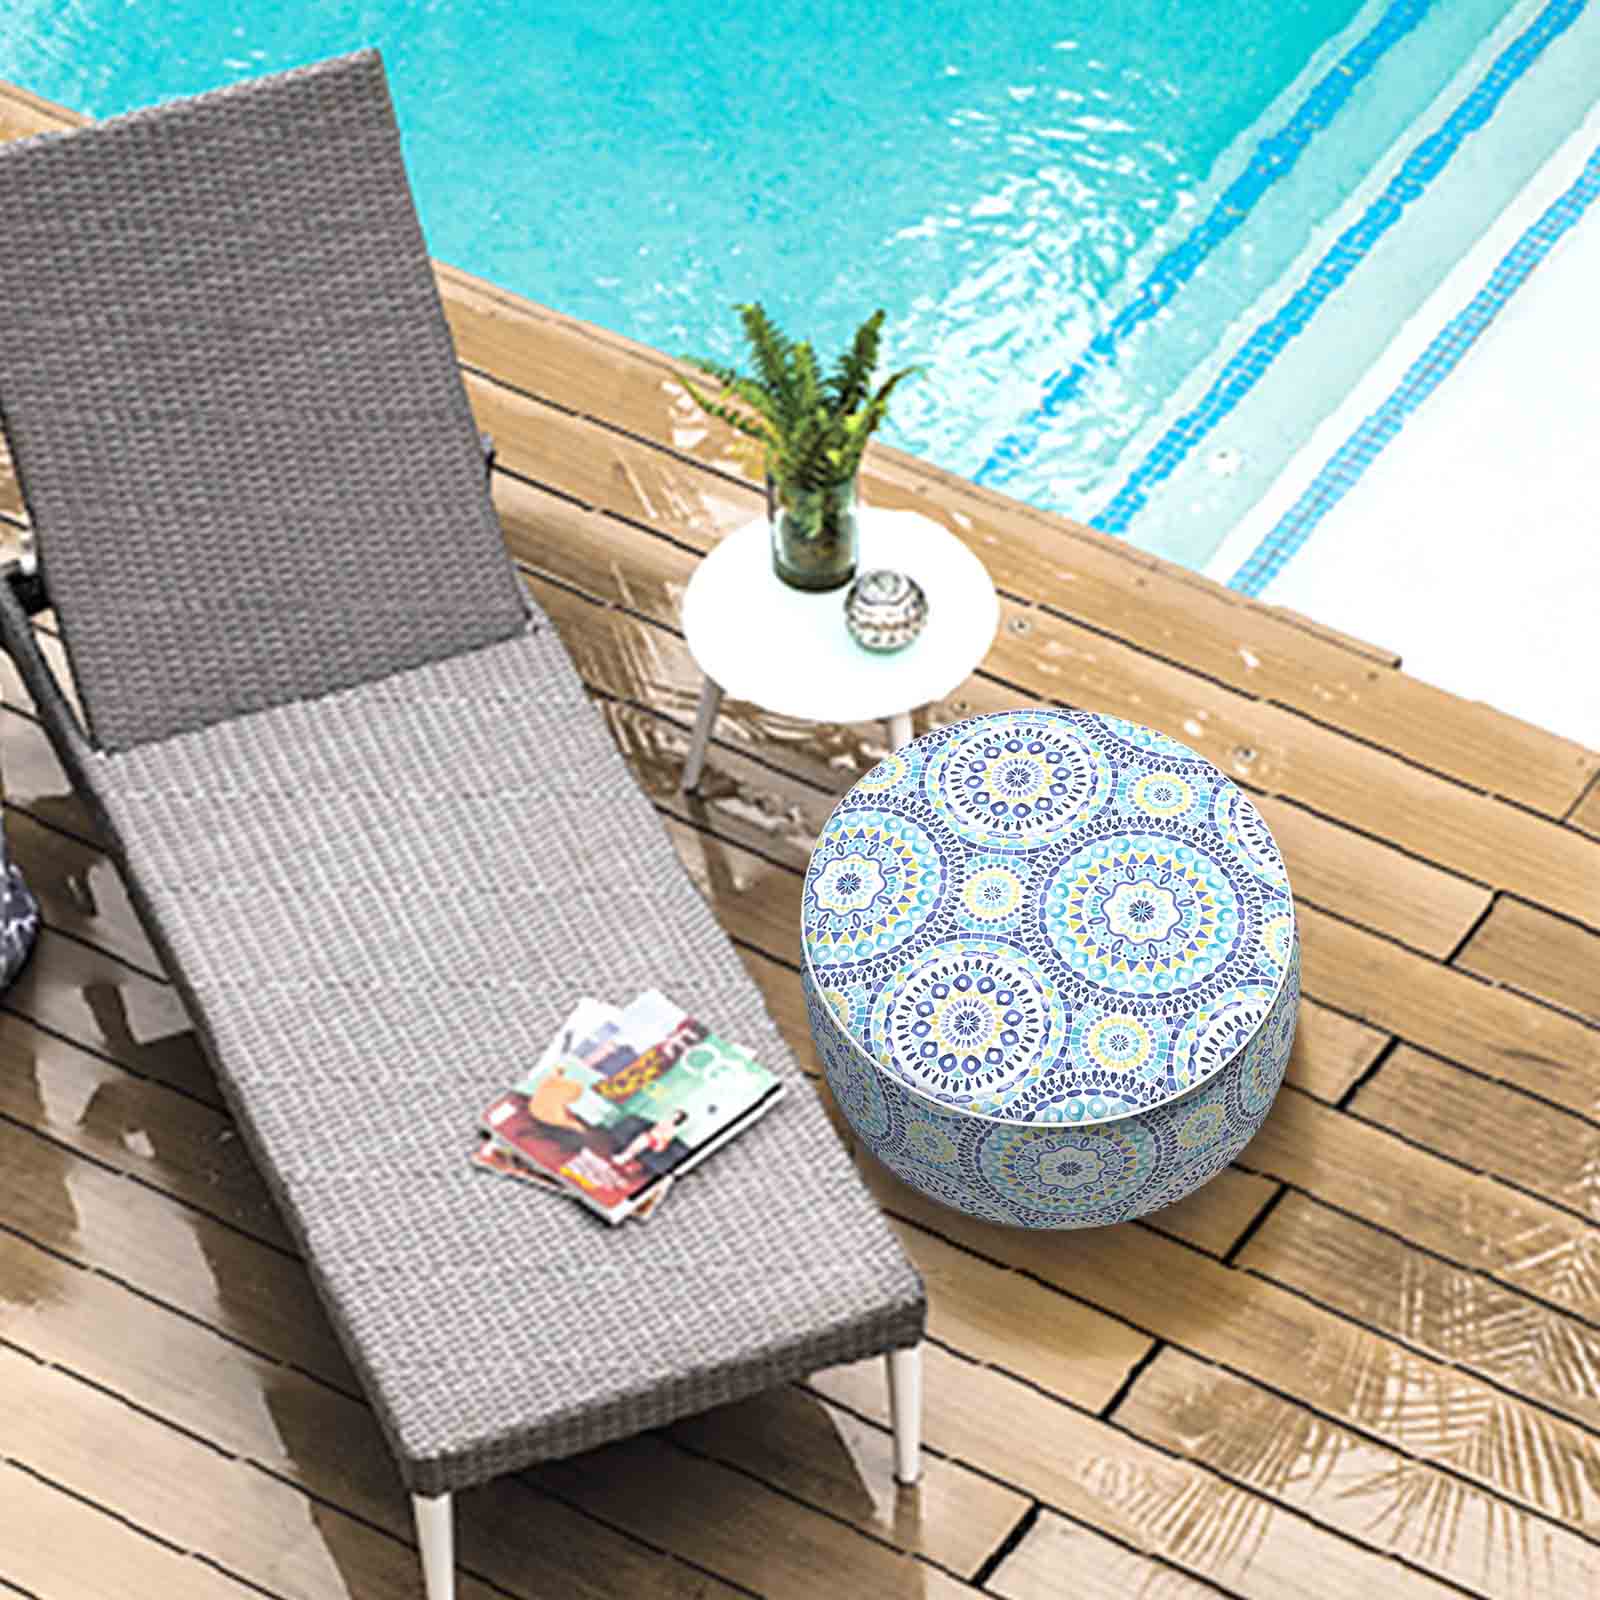 Inflatable ottoman used in patio